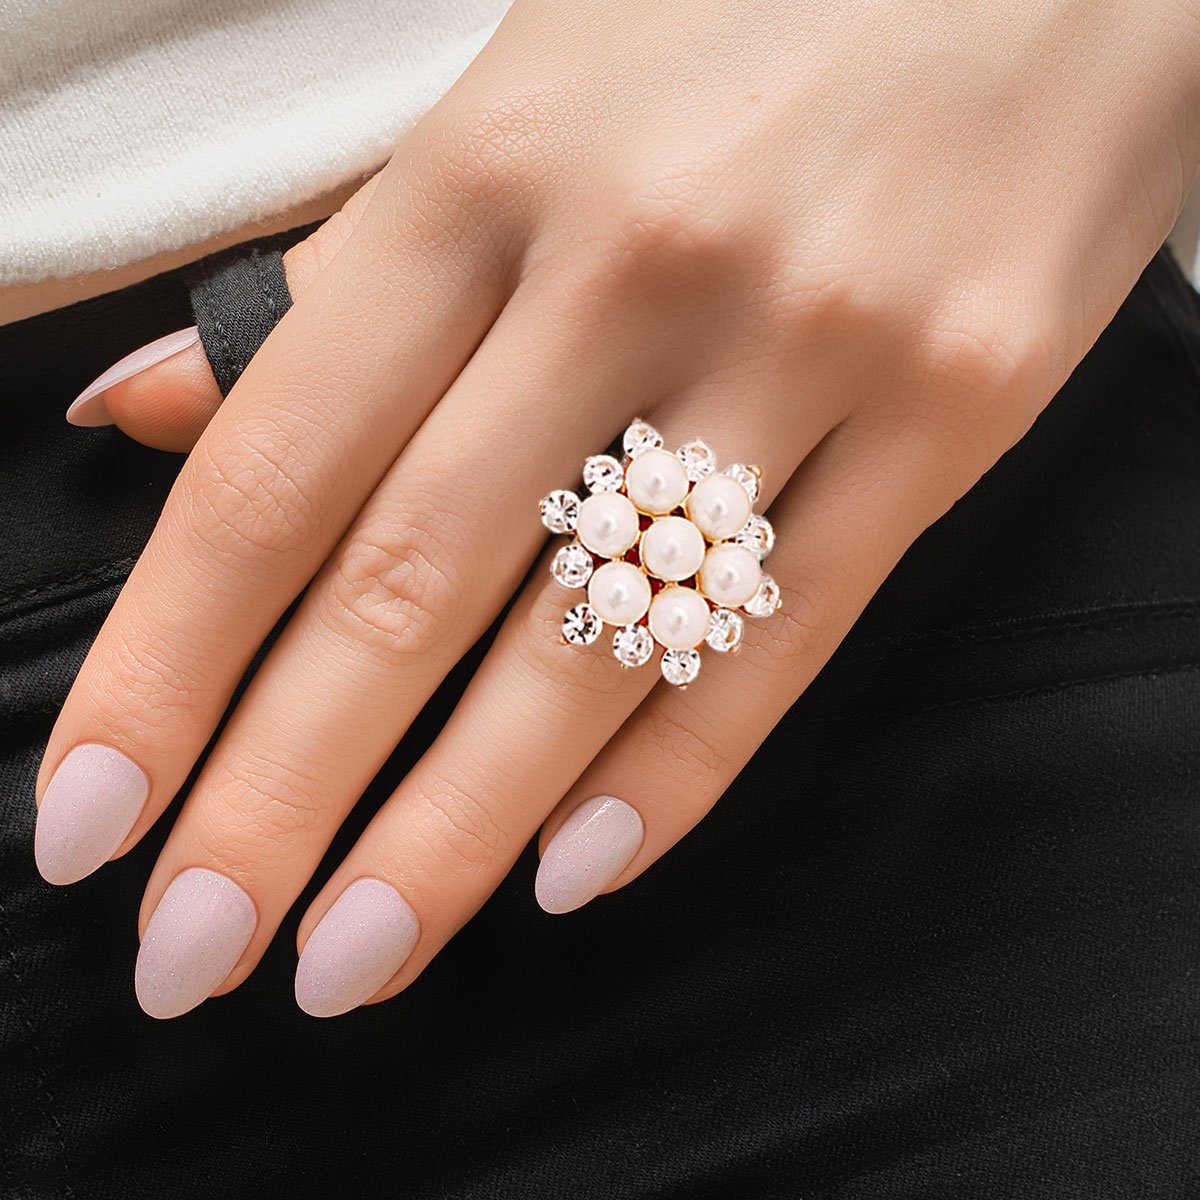 Gold Cluster Pearl Ring